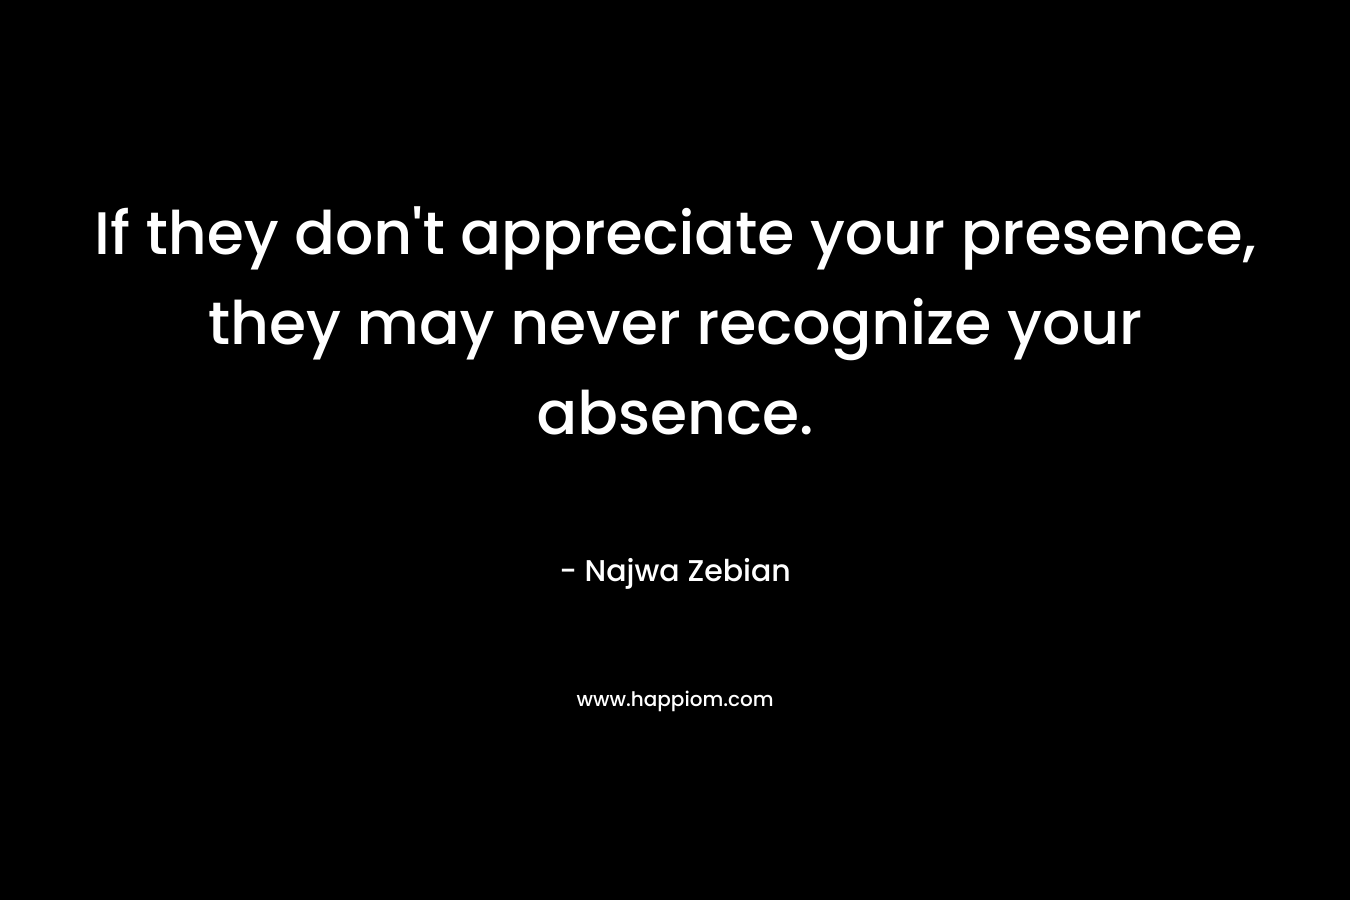 If they don't appreciate your presence, they may never recognize your absence.